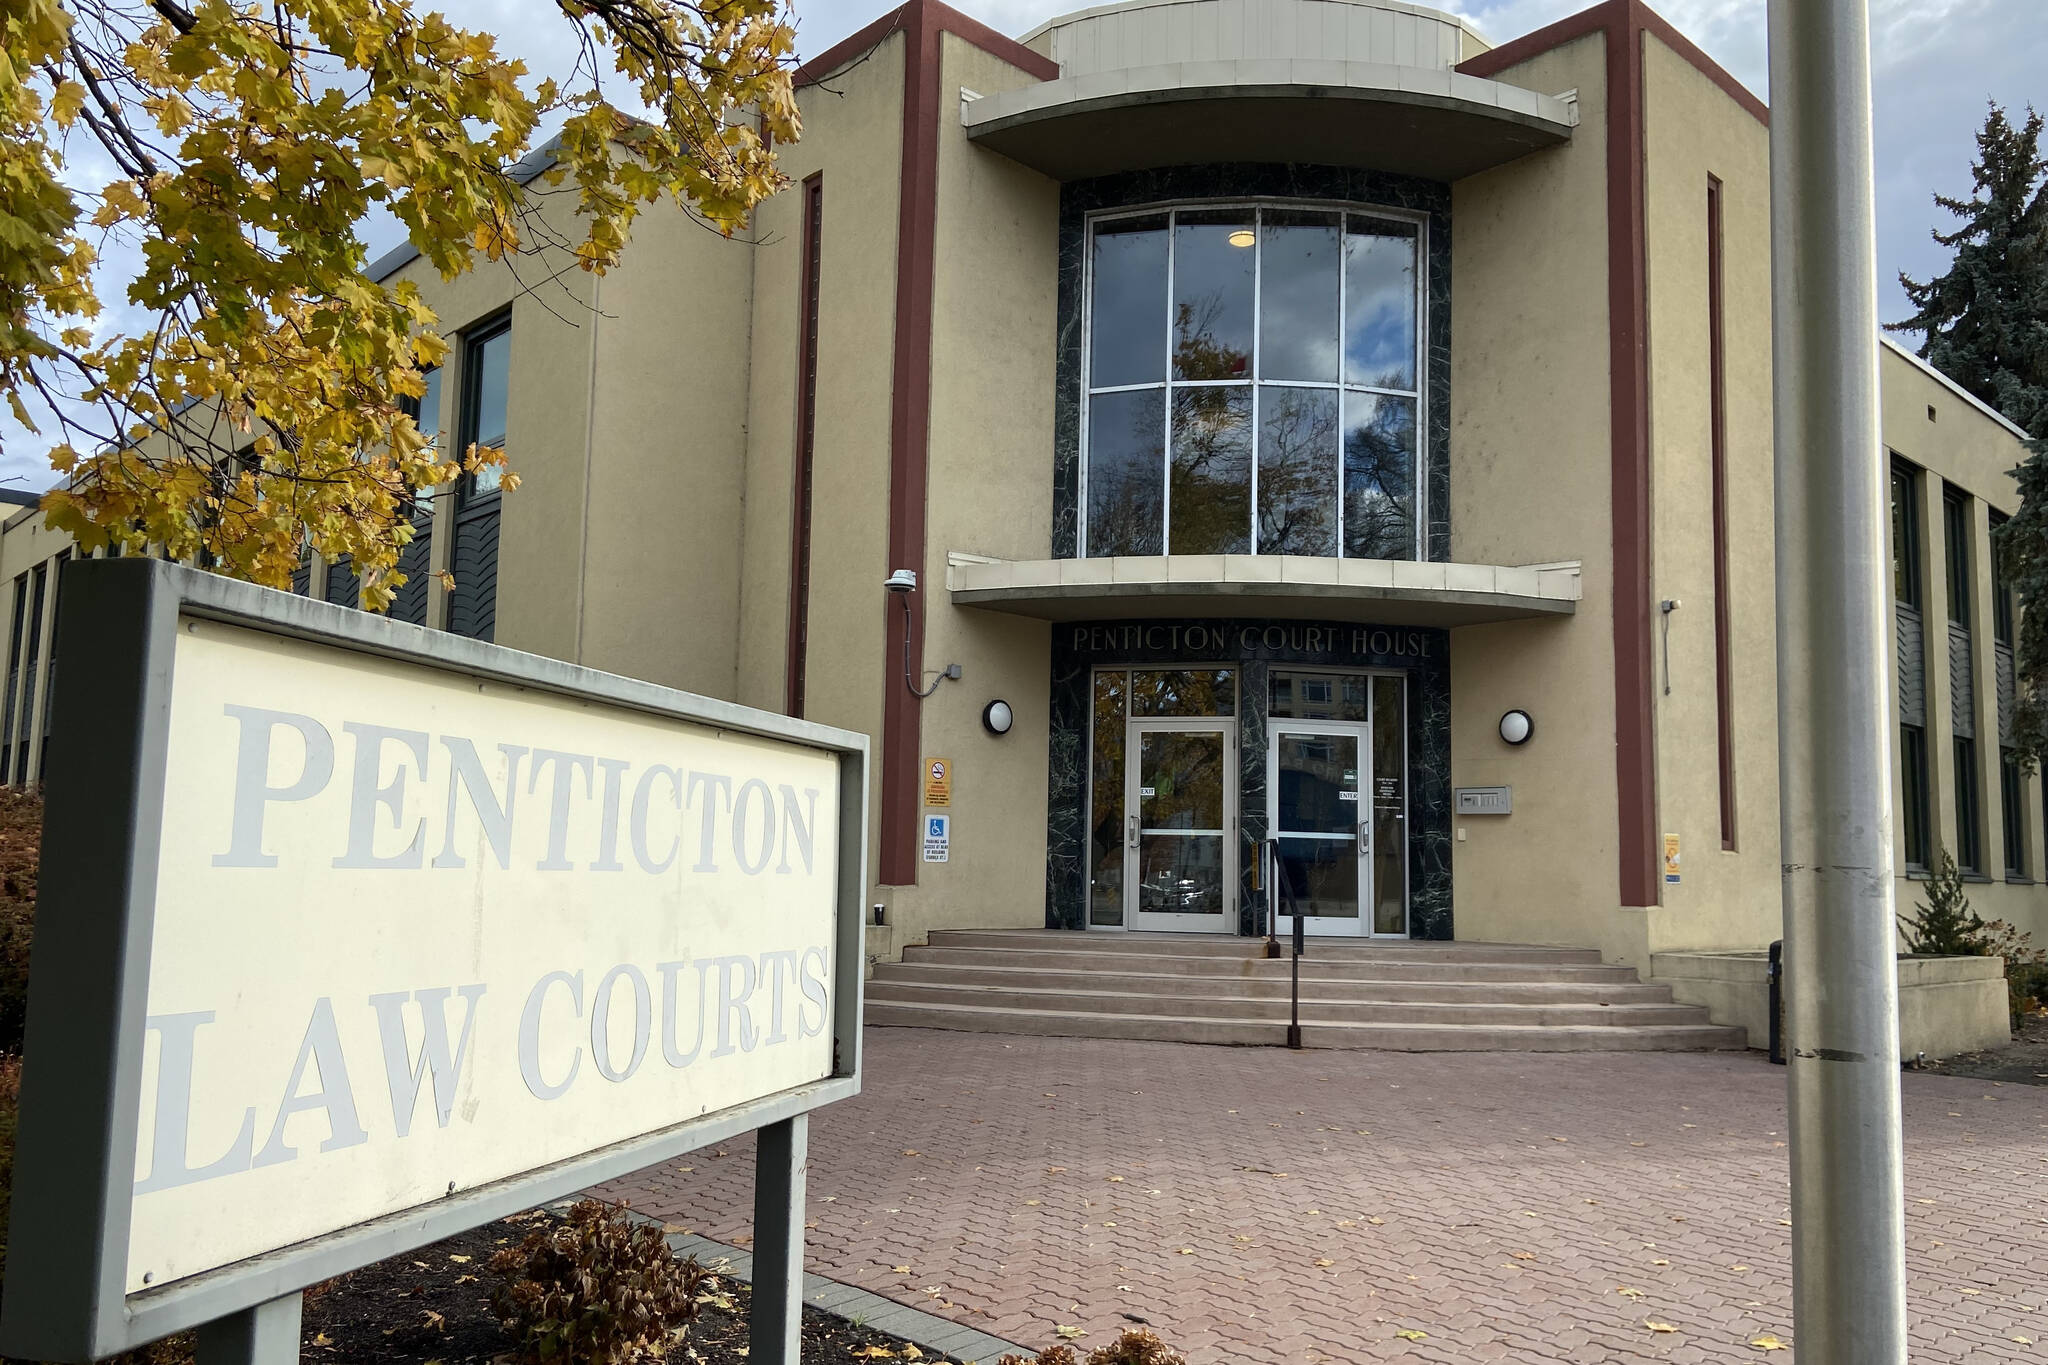 Penticton’s Law Courts. (Western News)